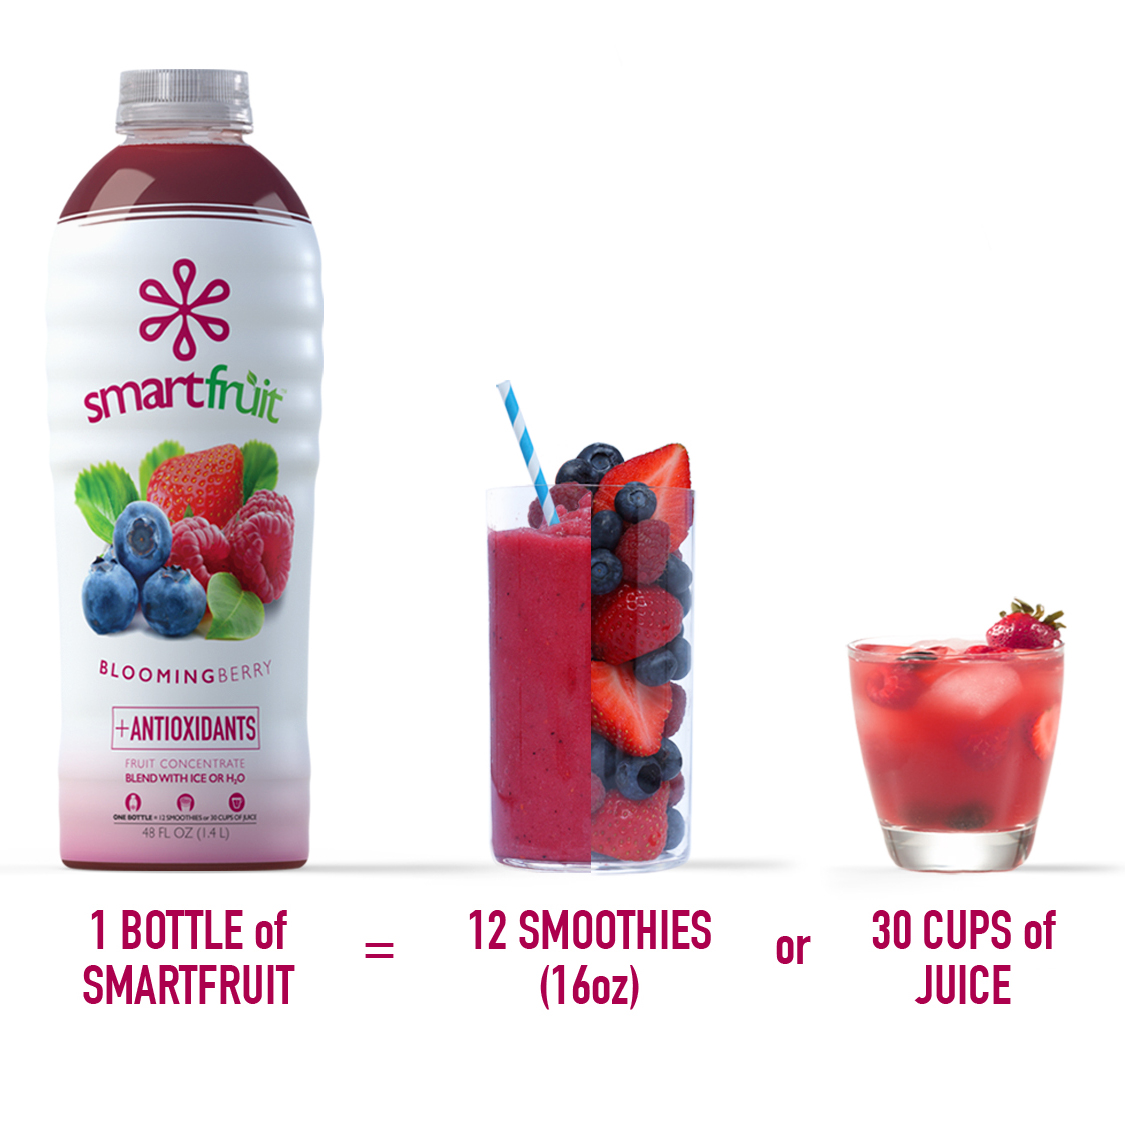 Commercial Smoothie Juice Supplier Enables Healthy Menu Options